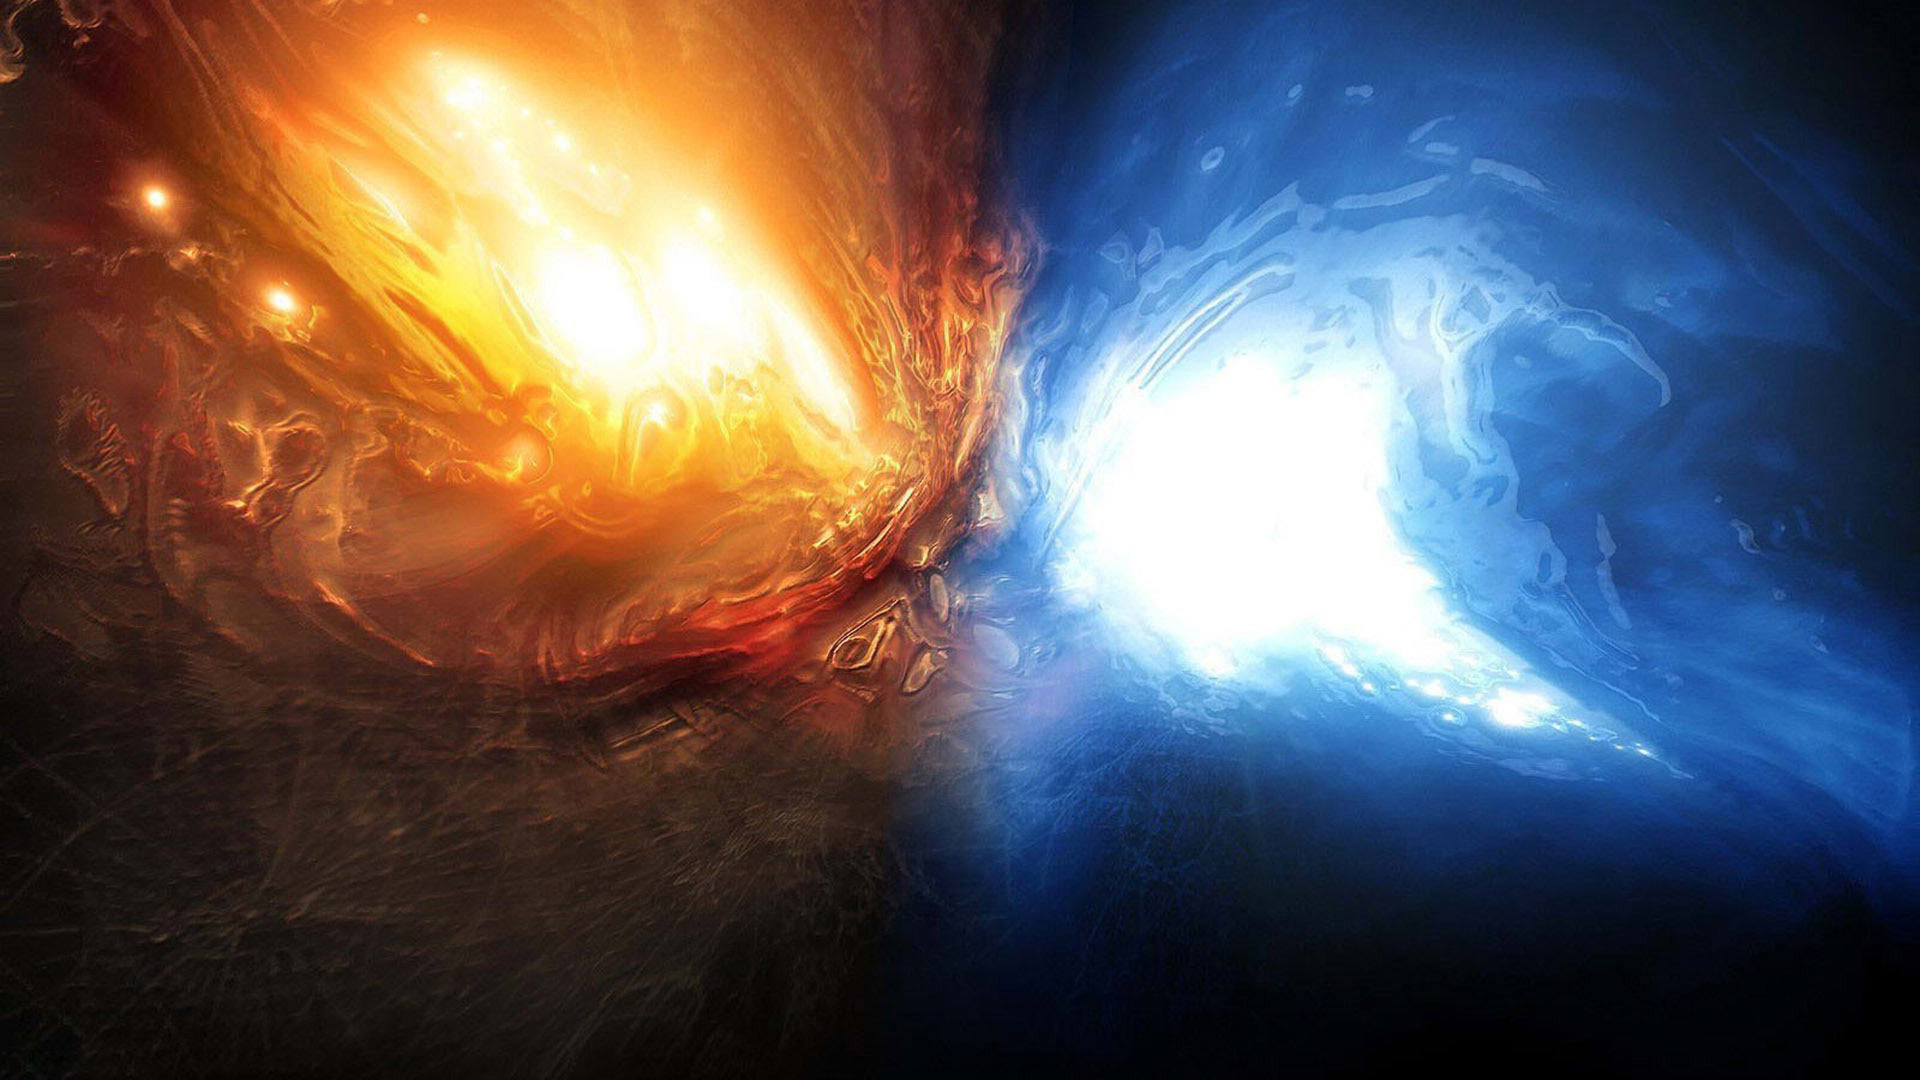 Fire Vs Ice Wallpaper - Earth Blue And Red - HD Wallpaper 